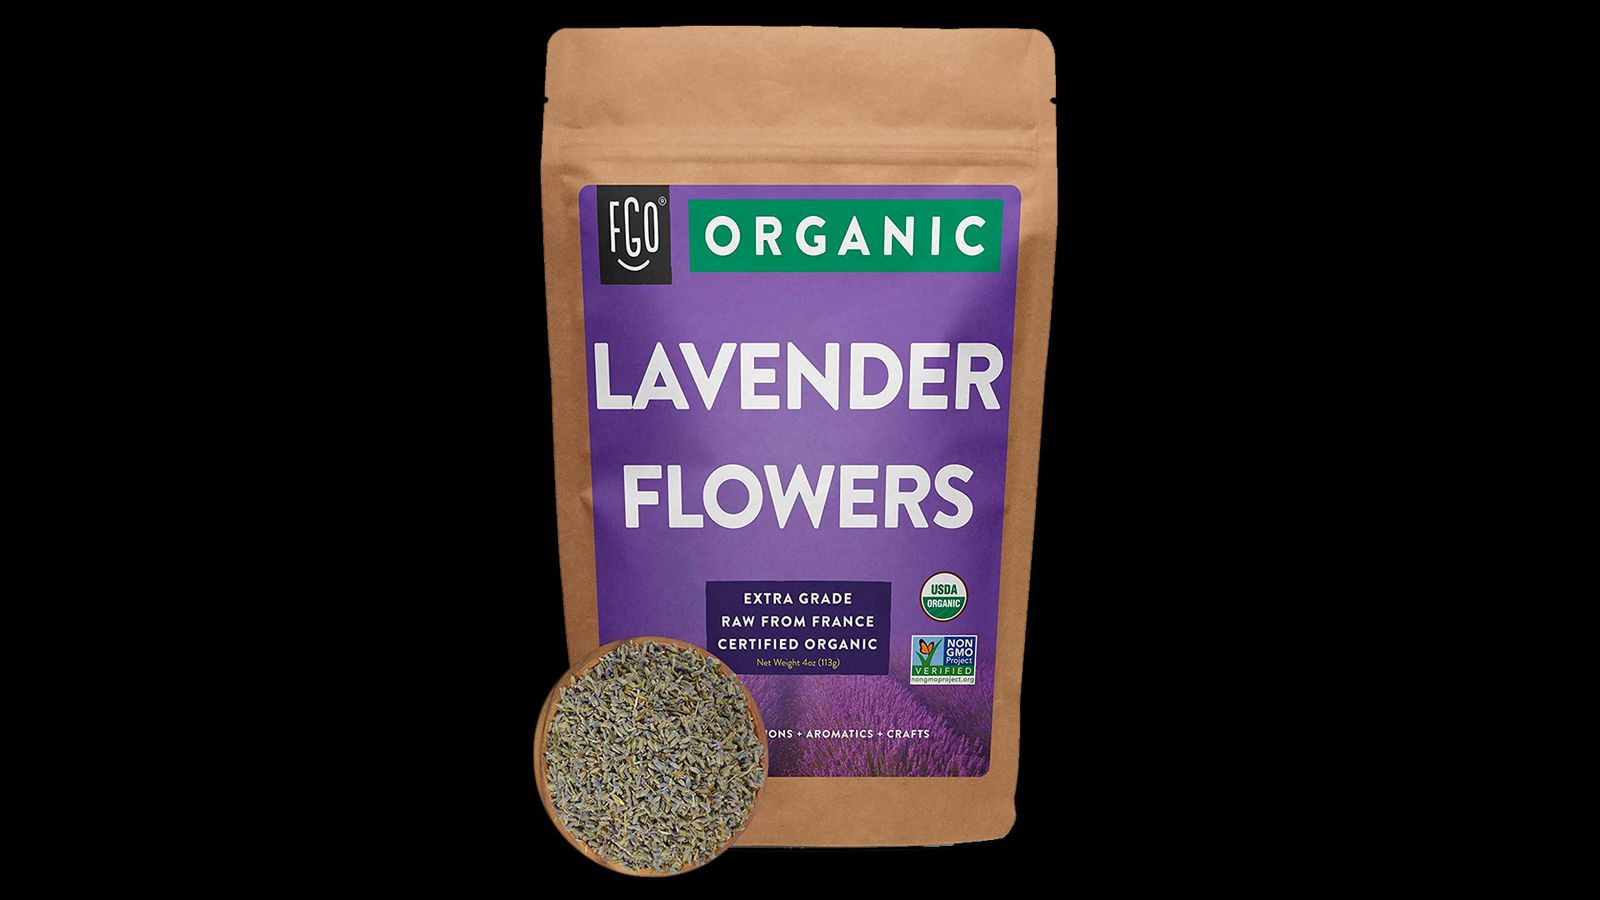 FGO Organic Lavender Flowers product image of a brown bag with purple and green labelling.